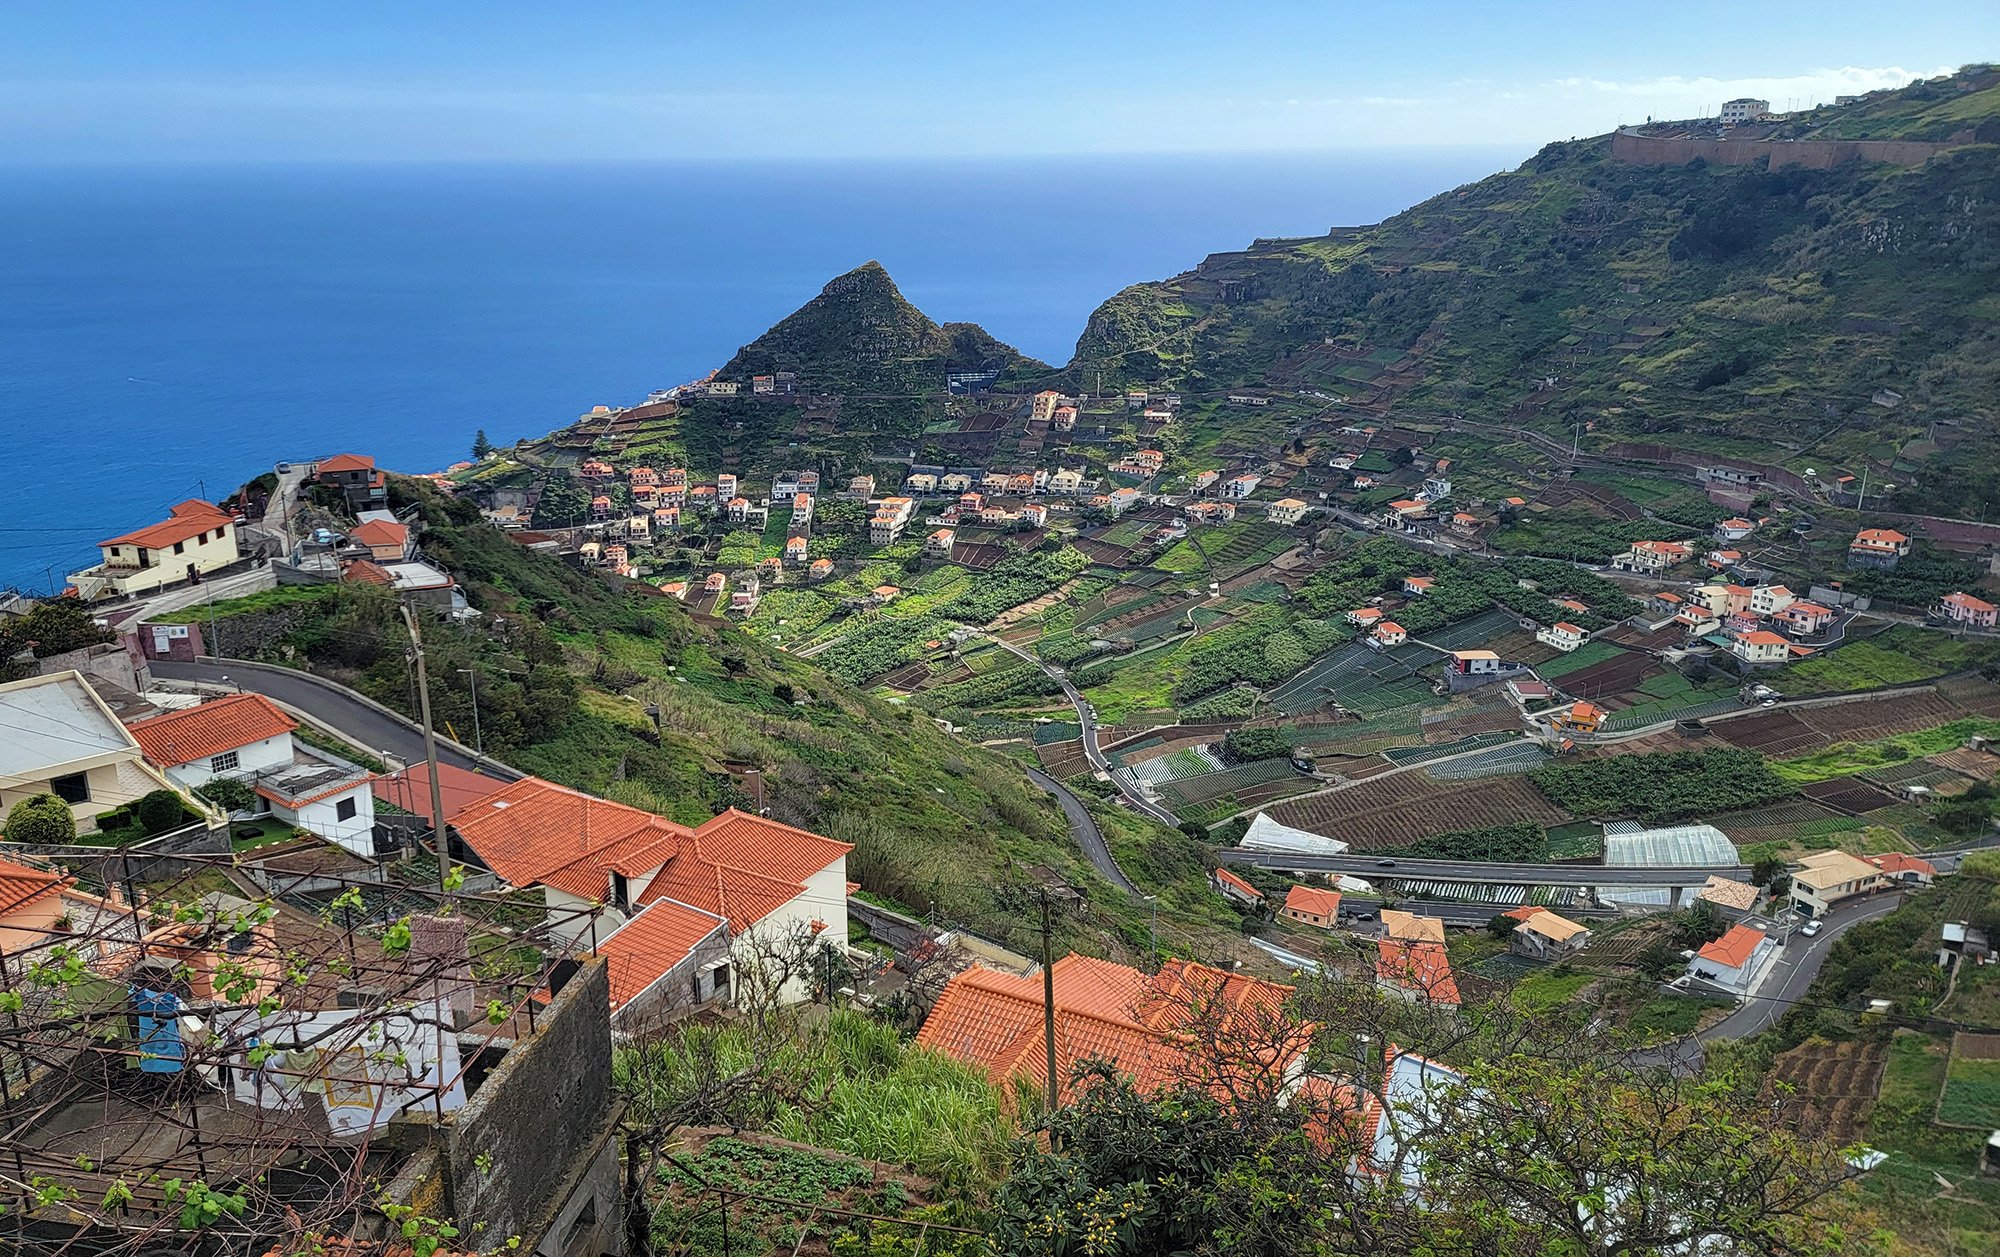 There's houses everywhere all the way up to 700-800m elevation near Funchal. It's crazy to see how people just made it work. Everyone has a view of the sea here!